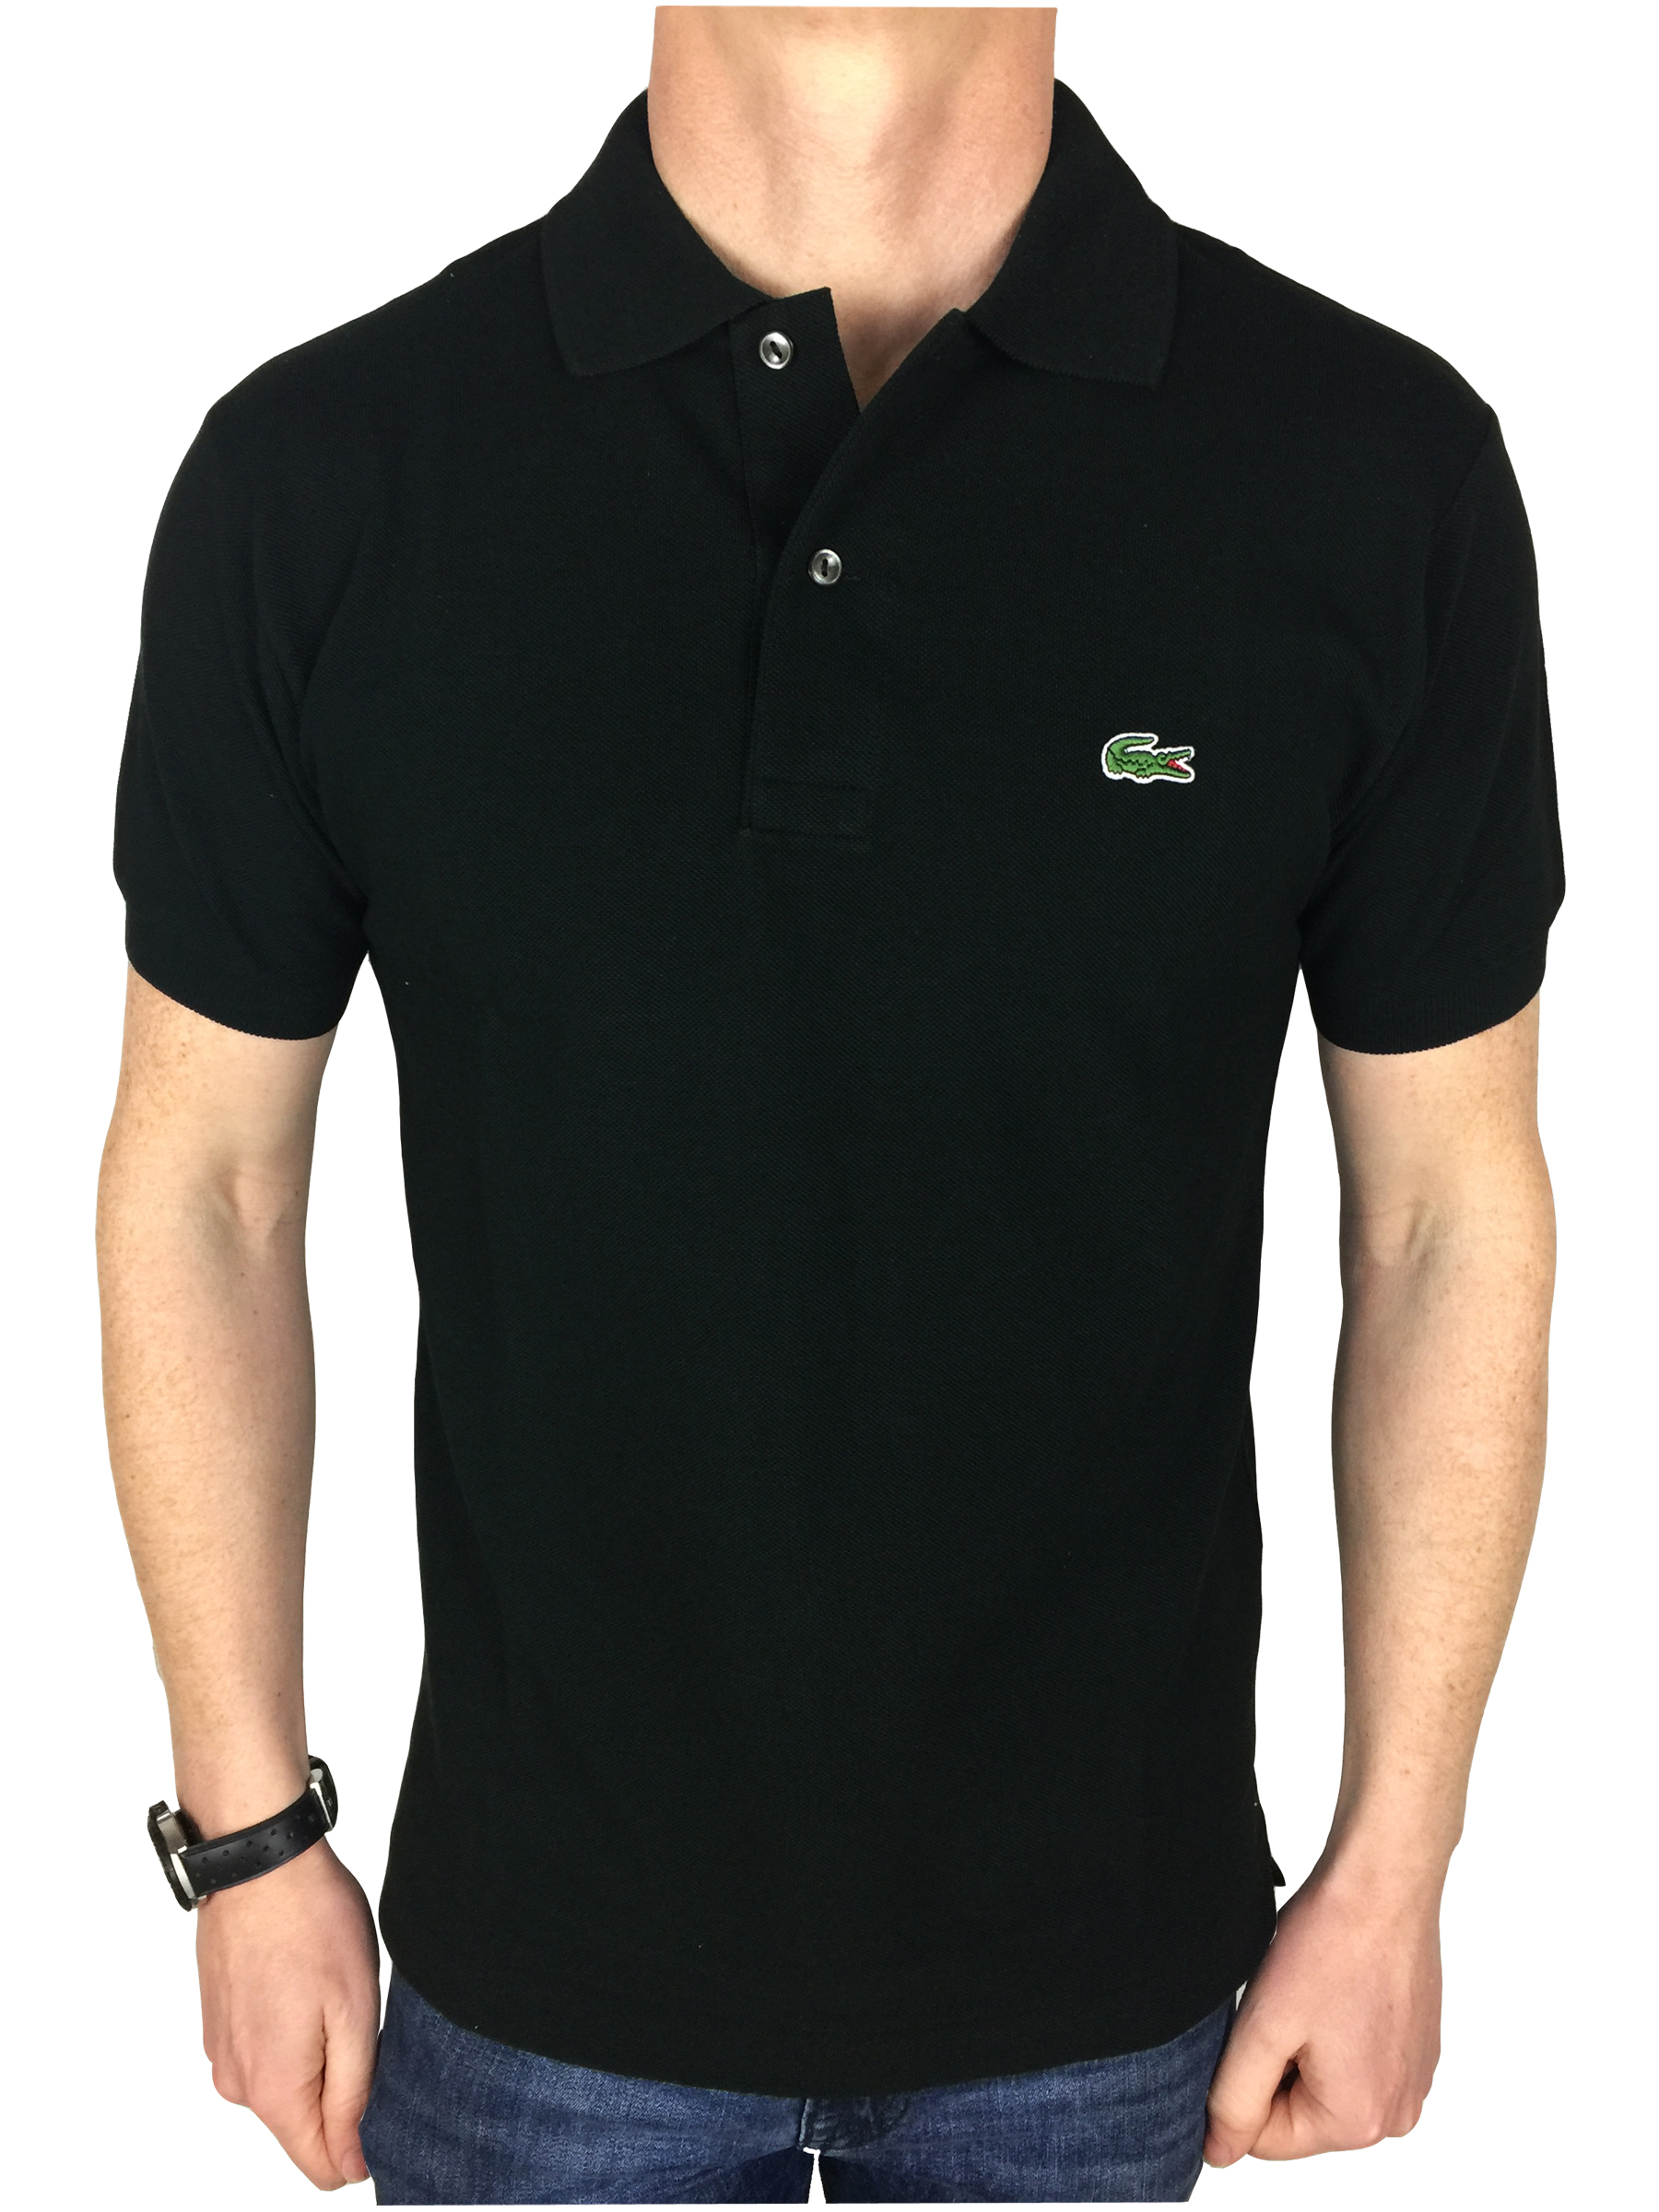 Lacoste Mens S/S Logo Polo Shirt in Black, BNWT, RRP |